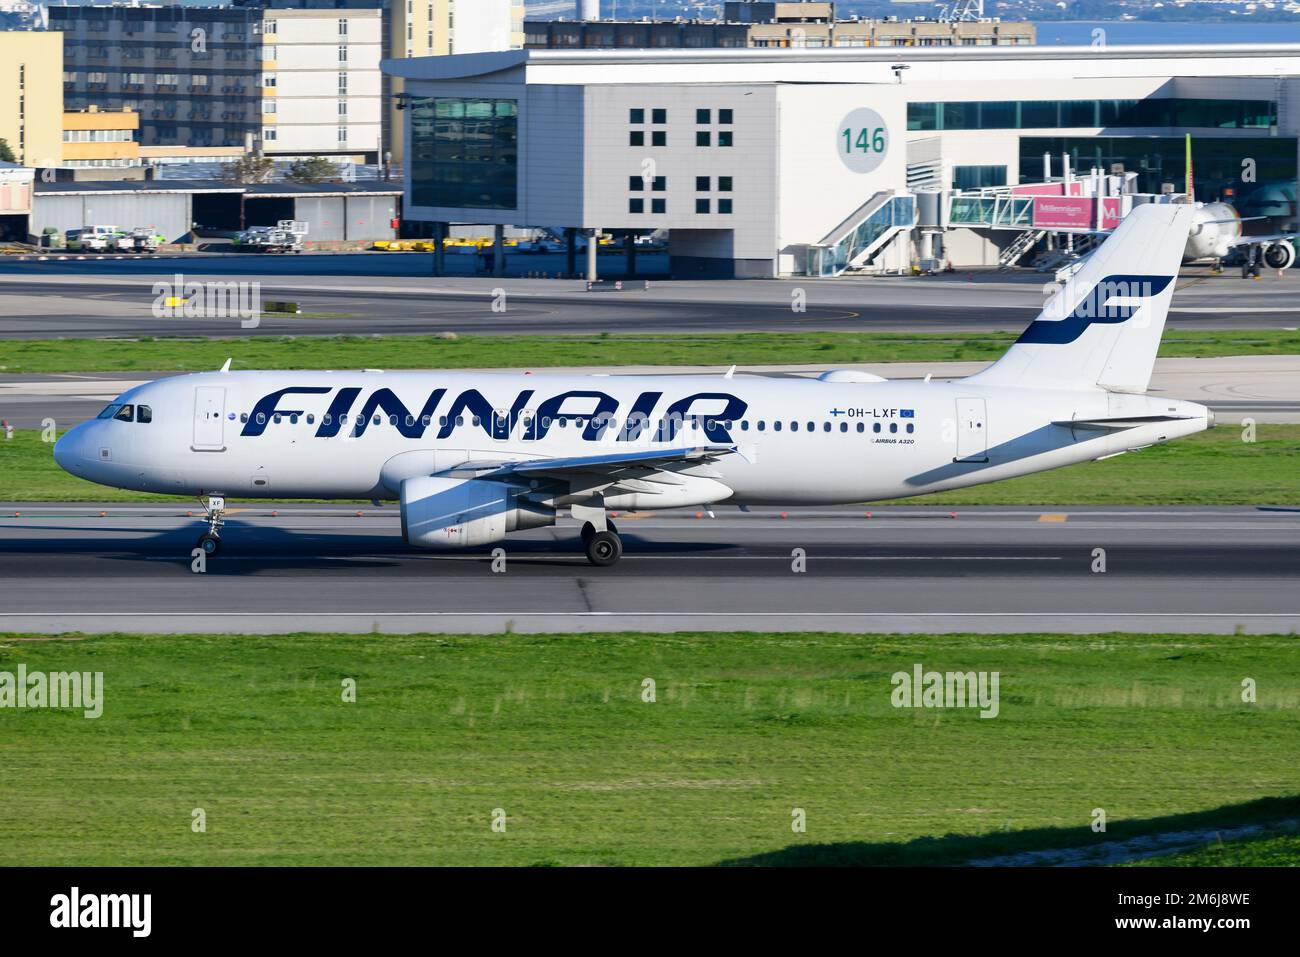 Finnair airline Airbus A320 aircraft. Airplane A320 of finish airline. Plane of Finnair registered as OH-LXF. Stock Photo